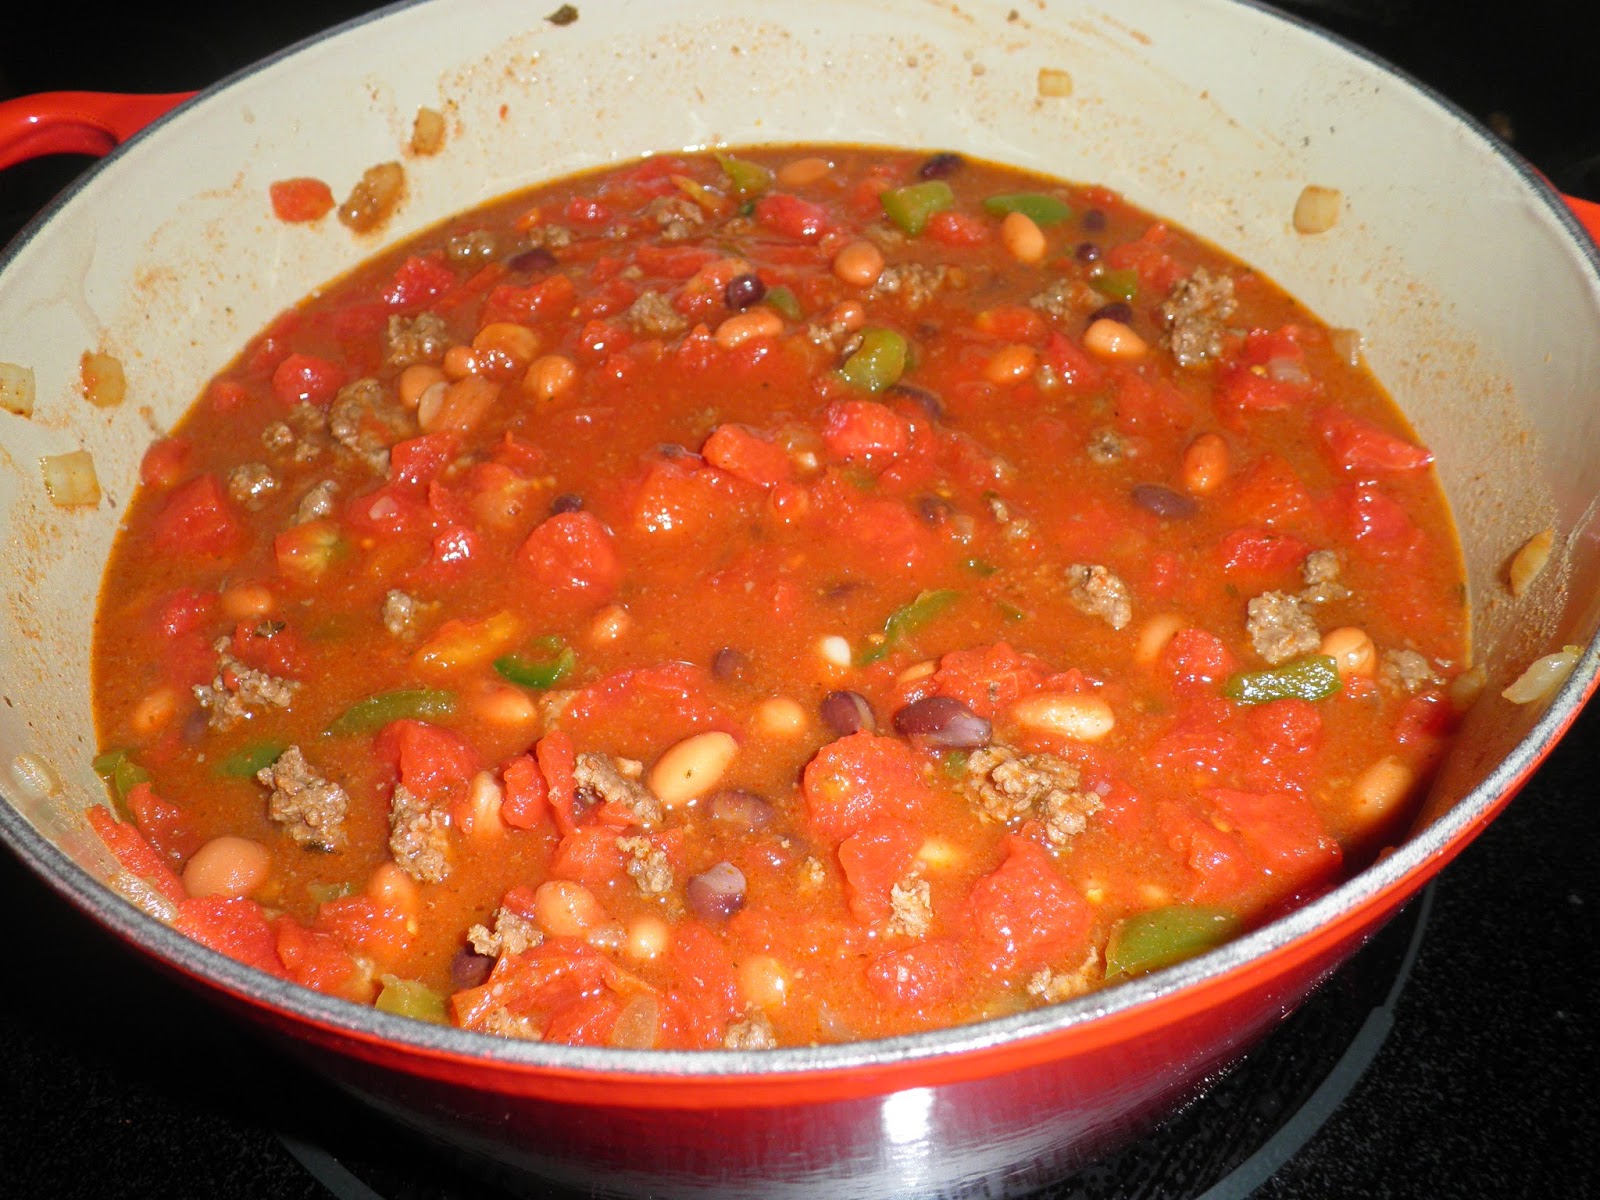 Secrets from the Cookie Princess: Beef, Bean and Beer Chili